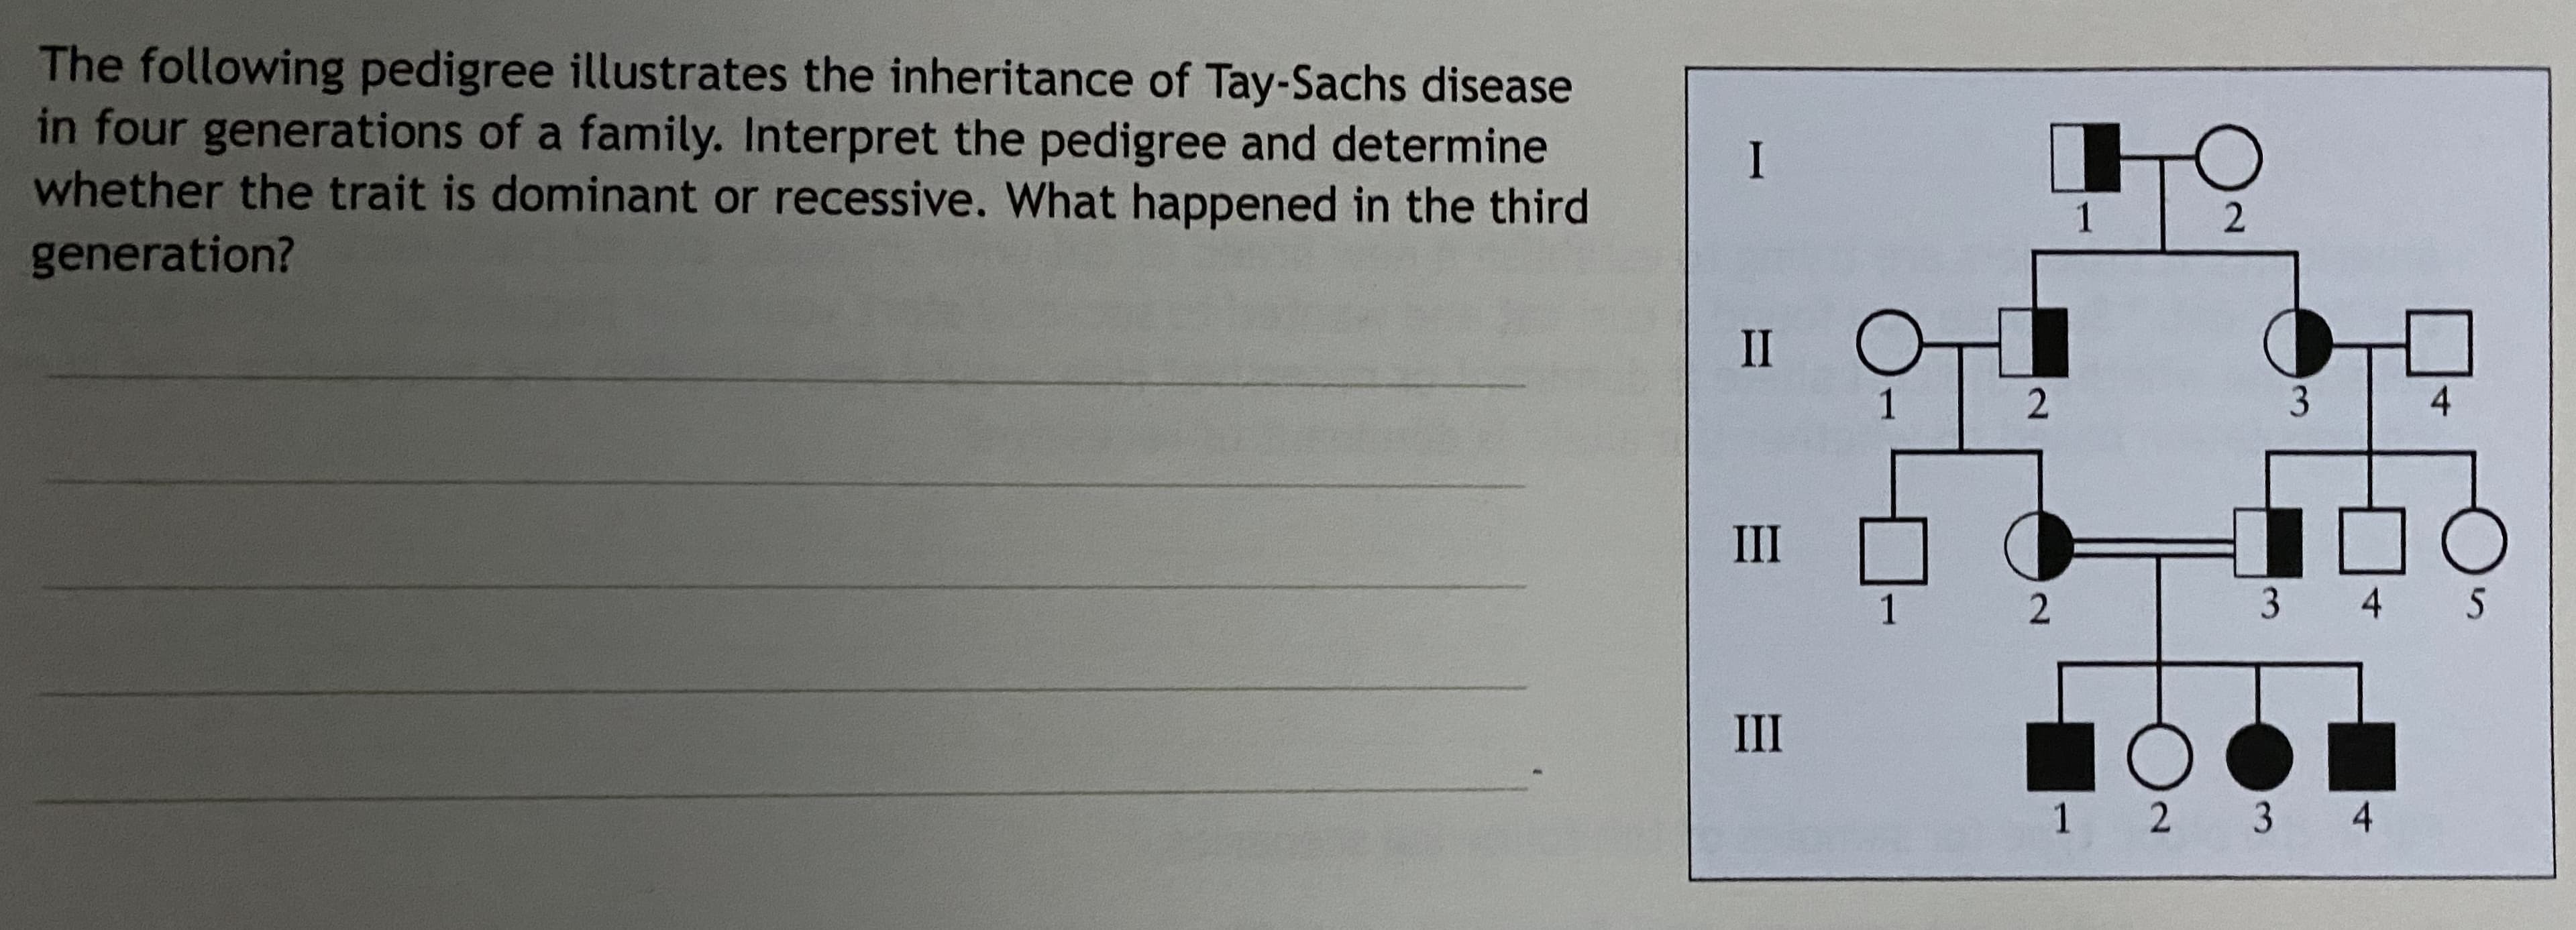 The following pedigree illustrates the inheritance of Tay-Sachs disease
in four generations of a family. Interpret the pedigree and determine
whether the trait is dominant or recessive. What happened in the third
generation?
